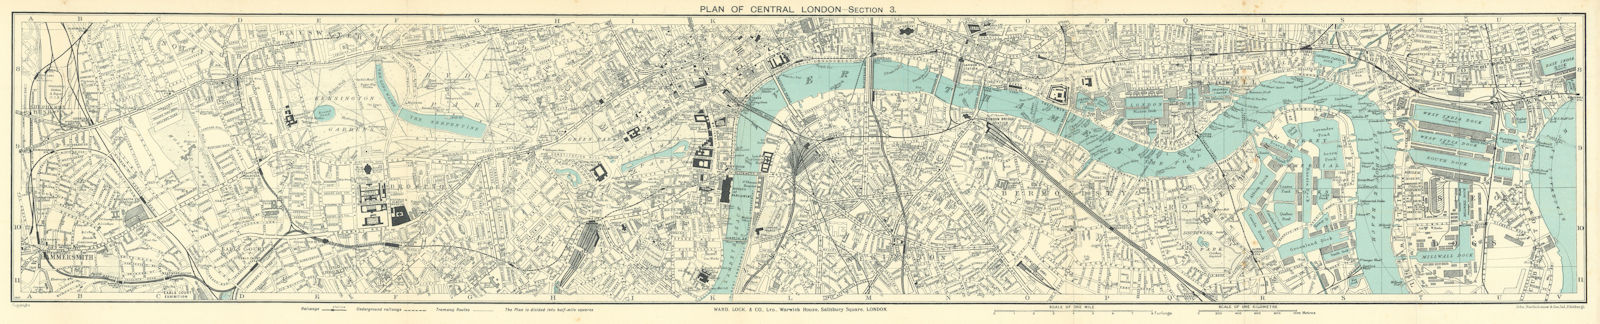 CENTRAL LONDON-SECTION 3 vintage town/city plan. London. WARD LOCK 1936 map